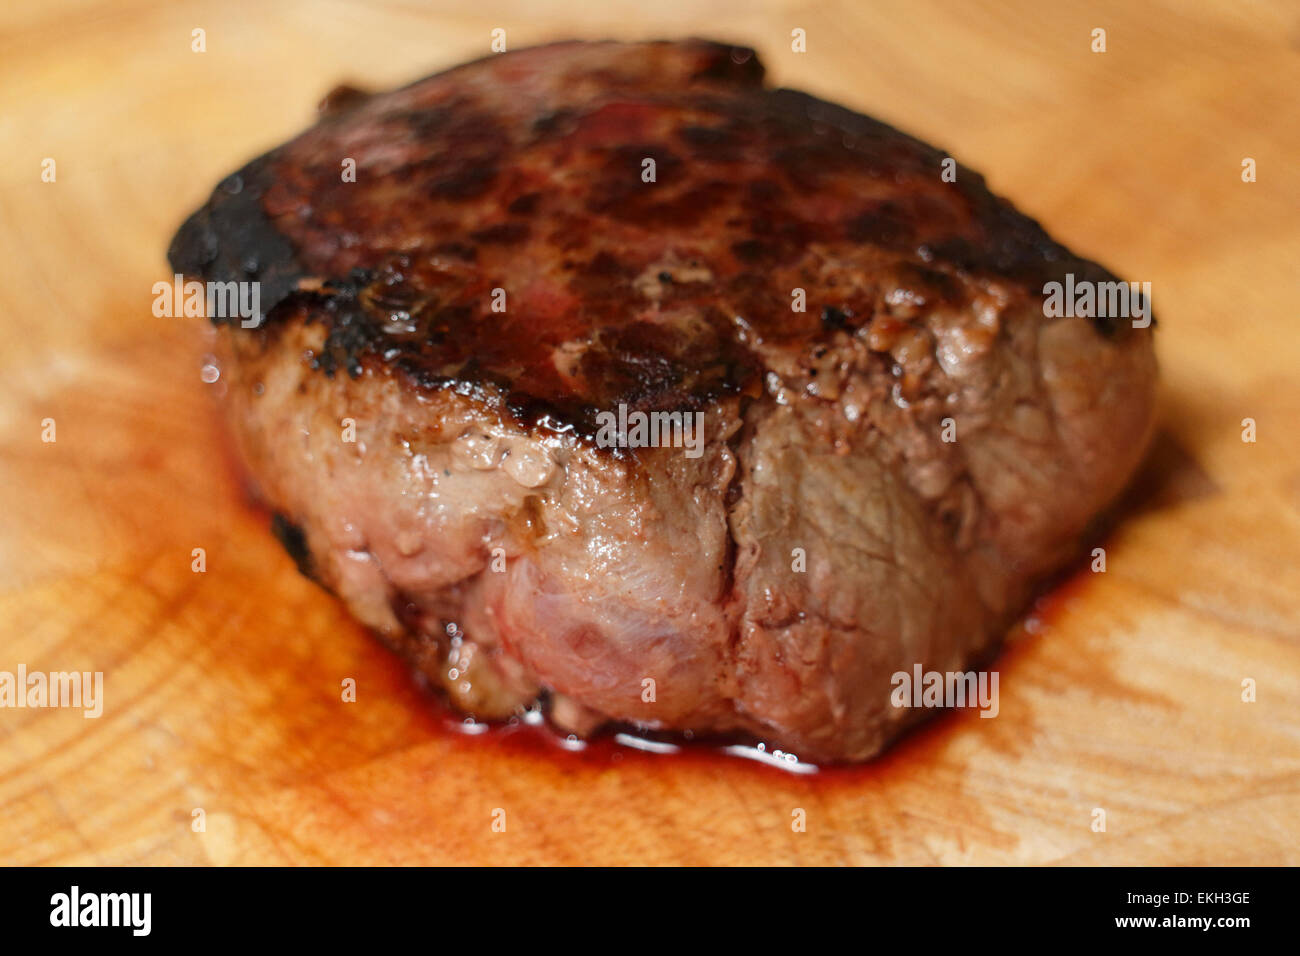 resting bison steak cooked rest shallow depth of field Stock Photo